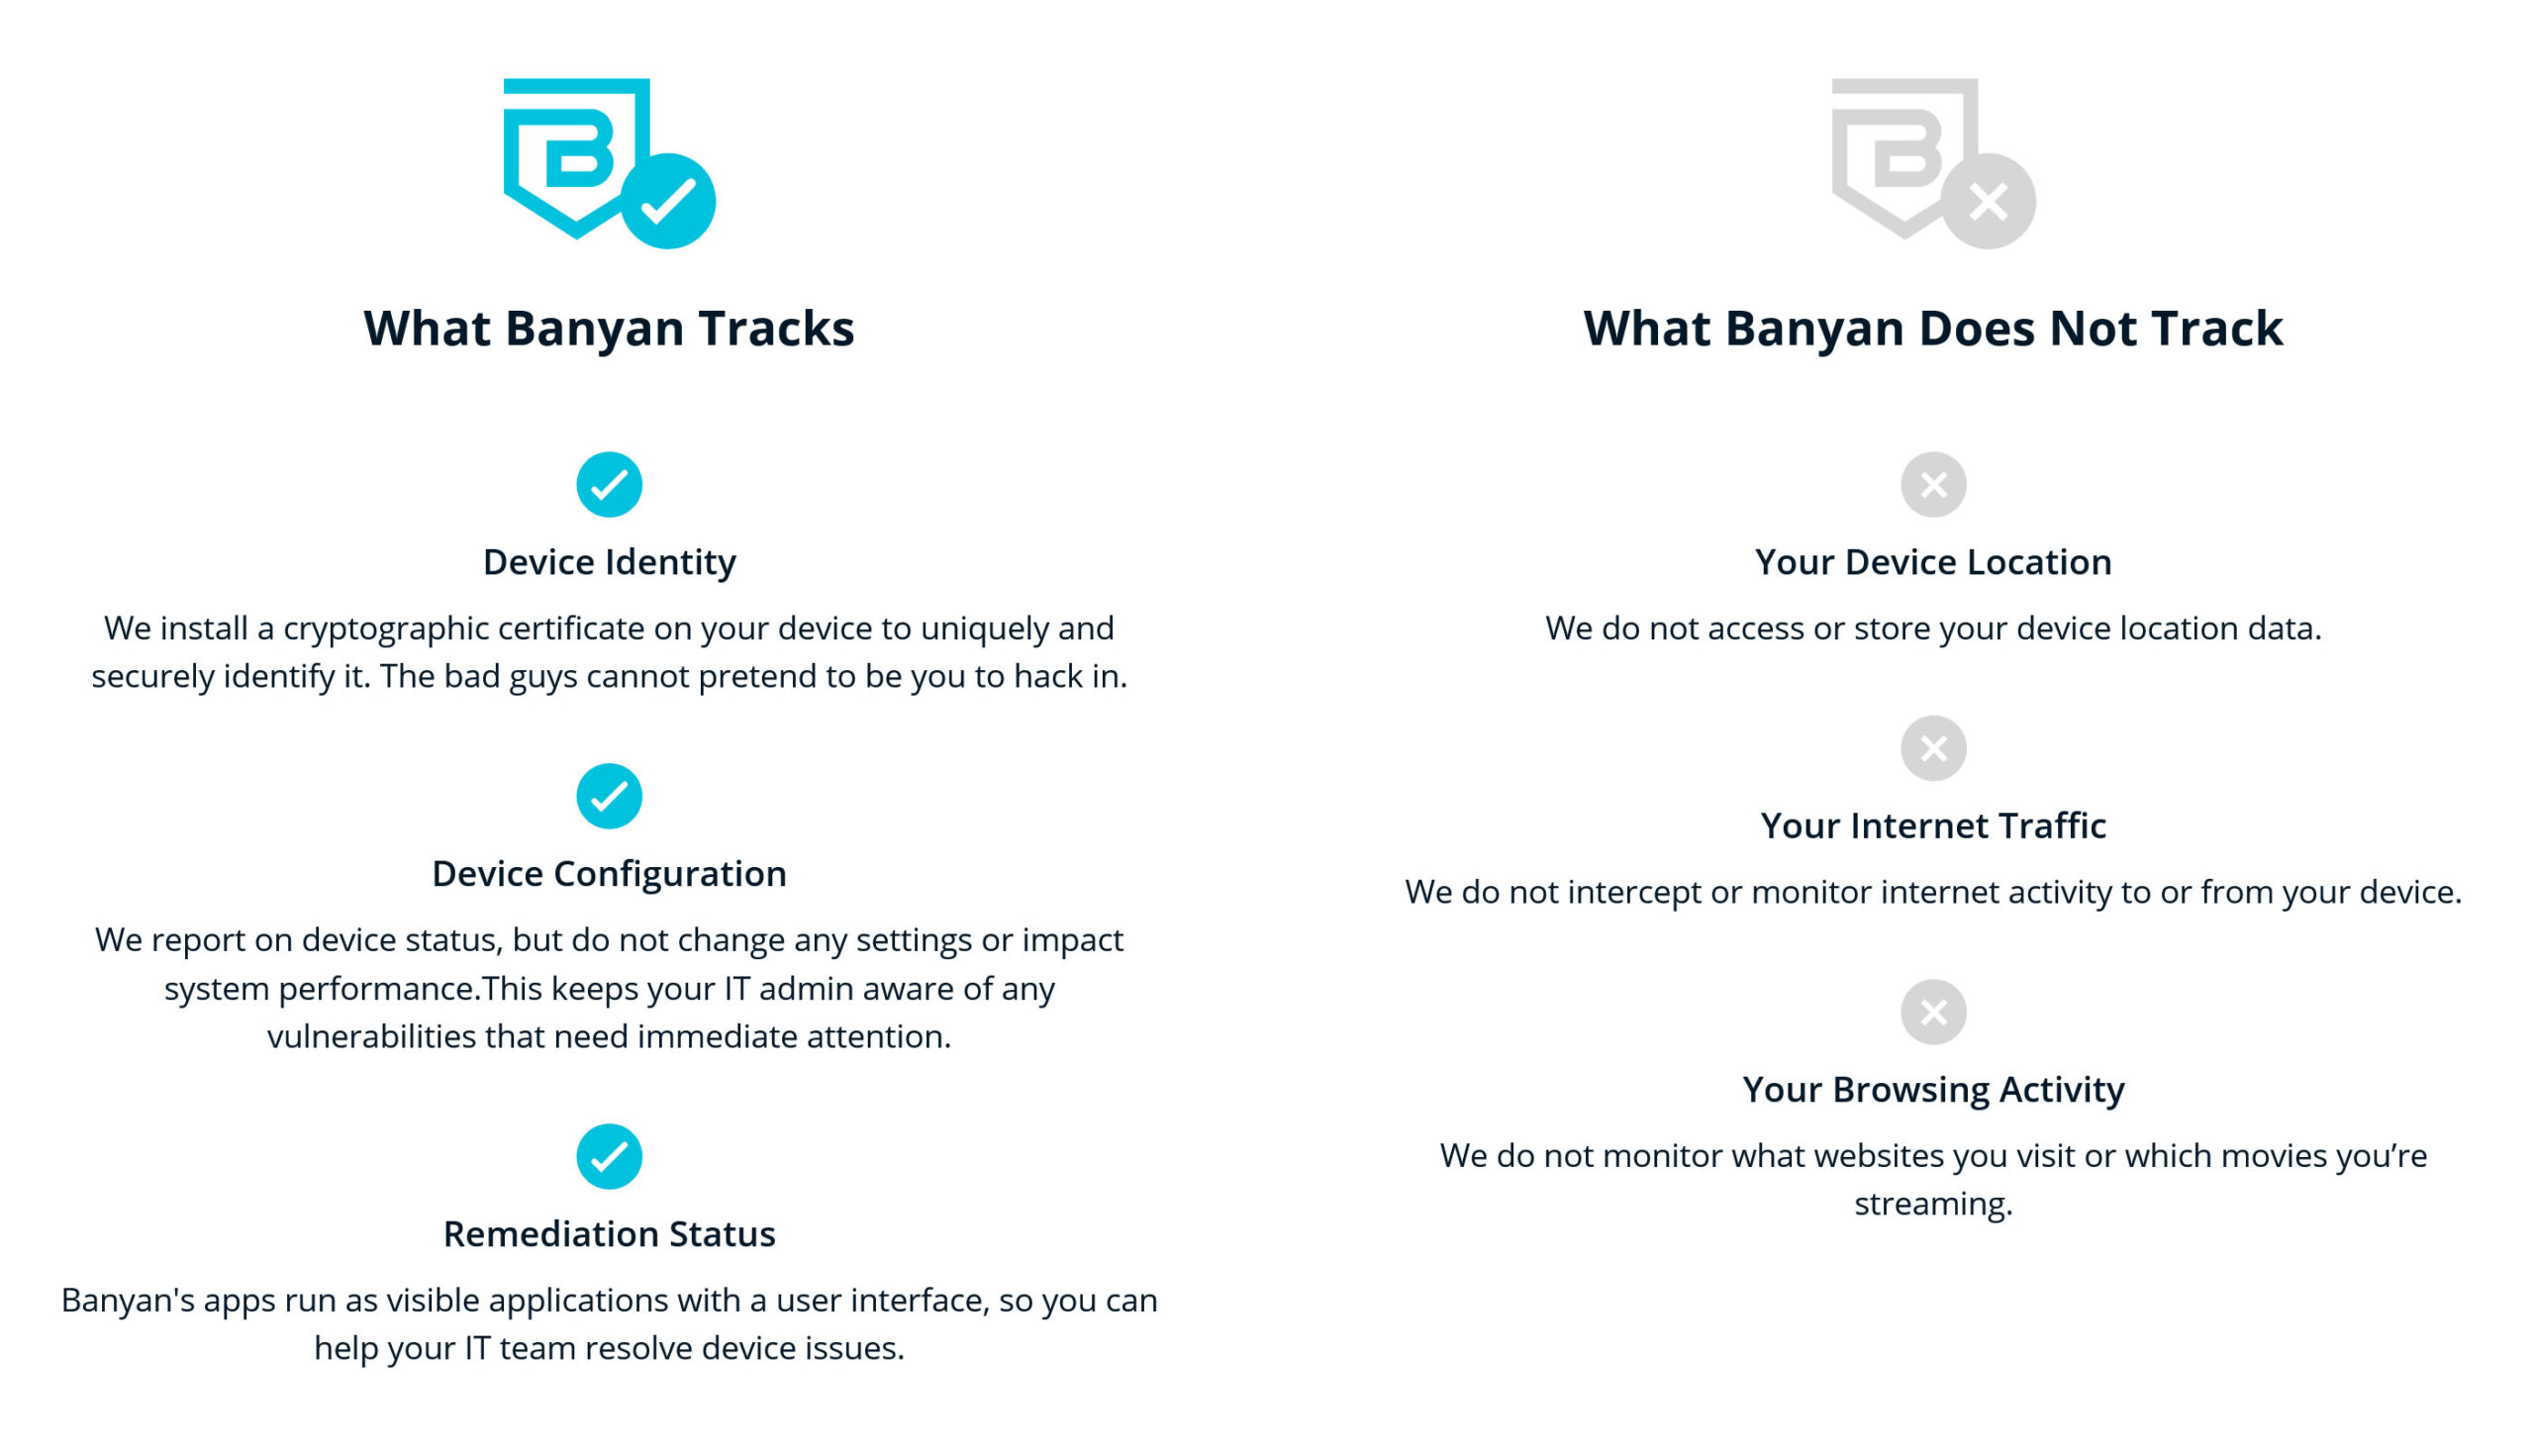 The Banyan app was developed with privacy in mind.